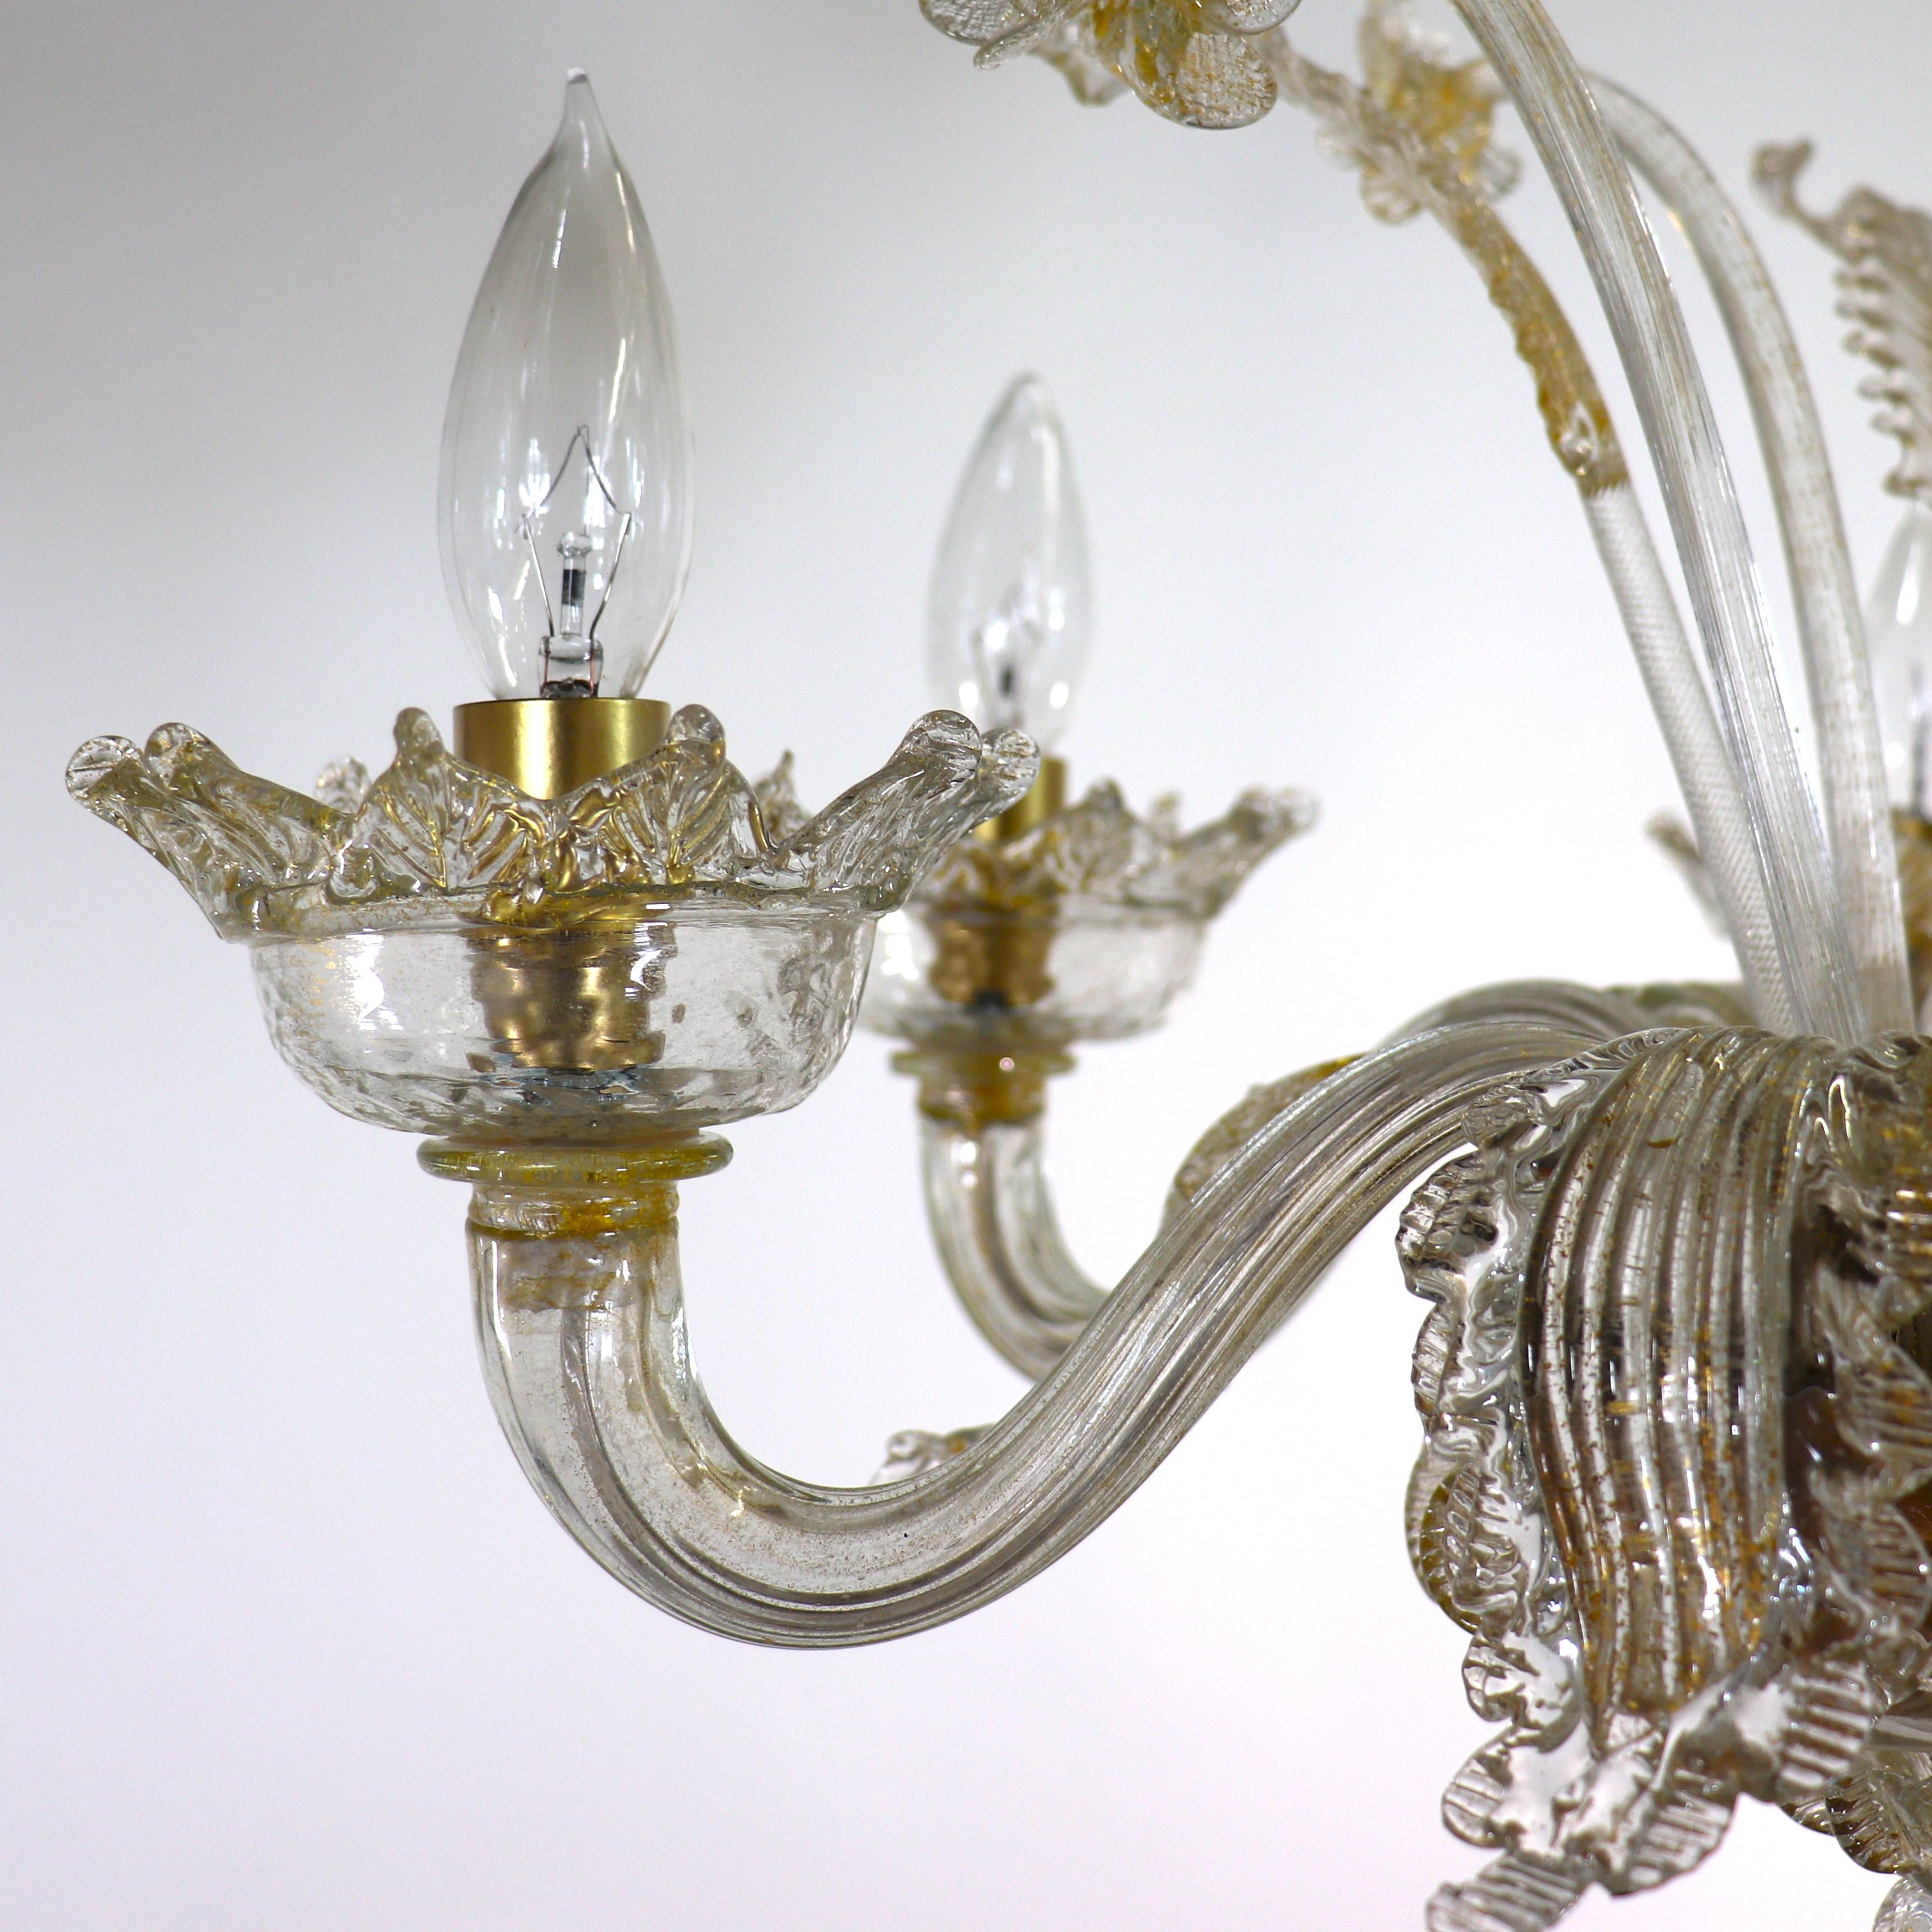  Vintage Baroque Style Gold Infused Cristallo Murano Chandelier For Sale 5